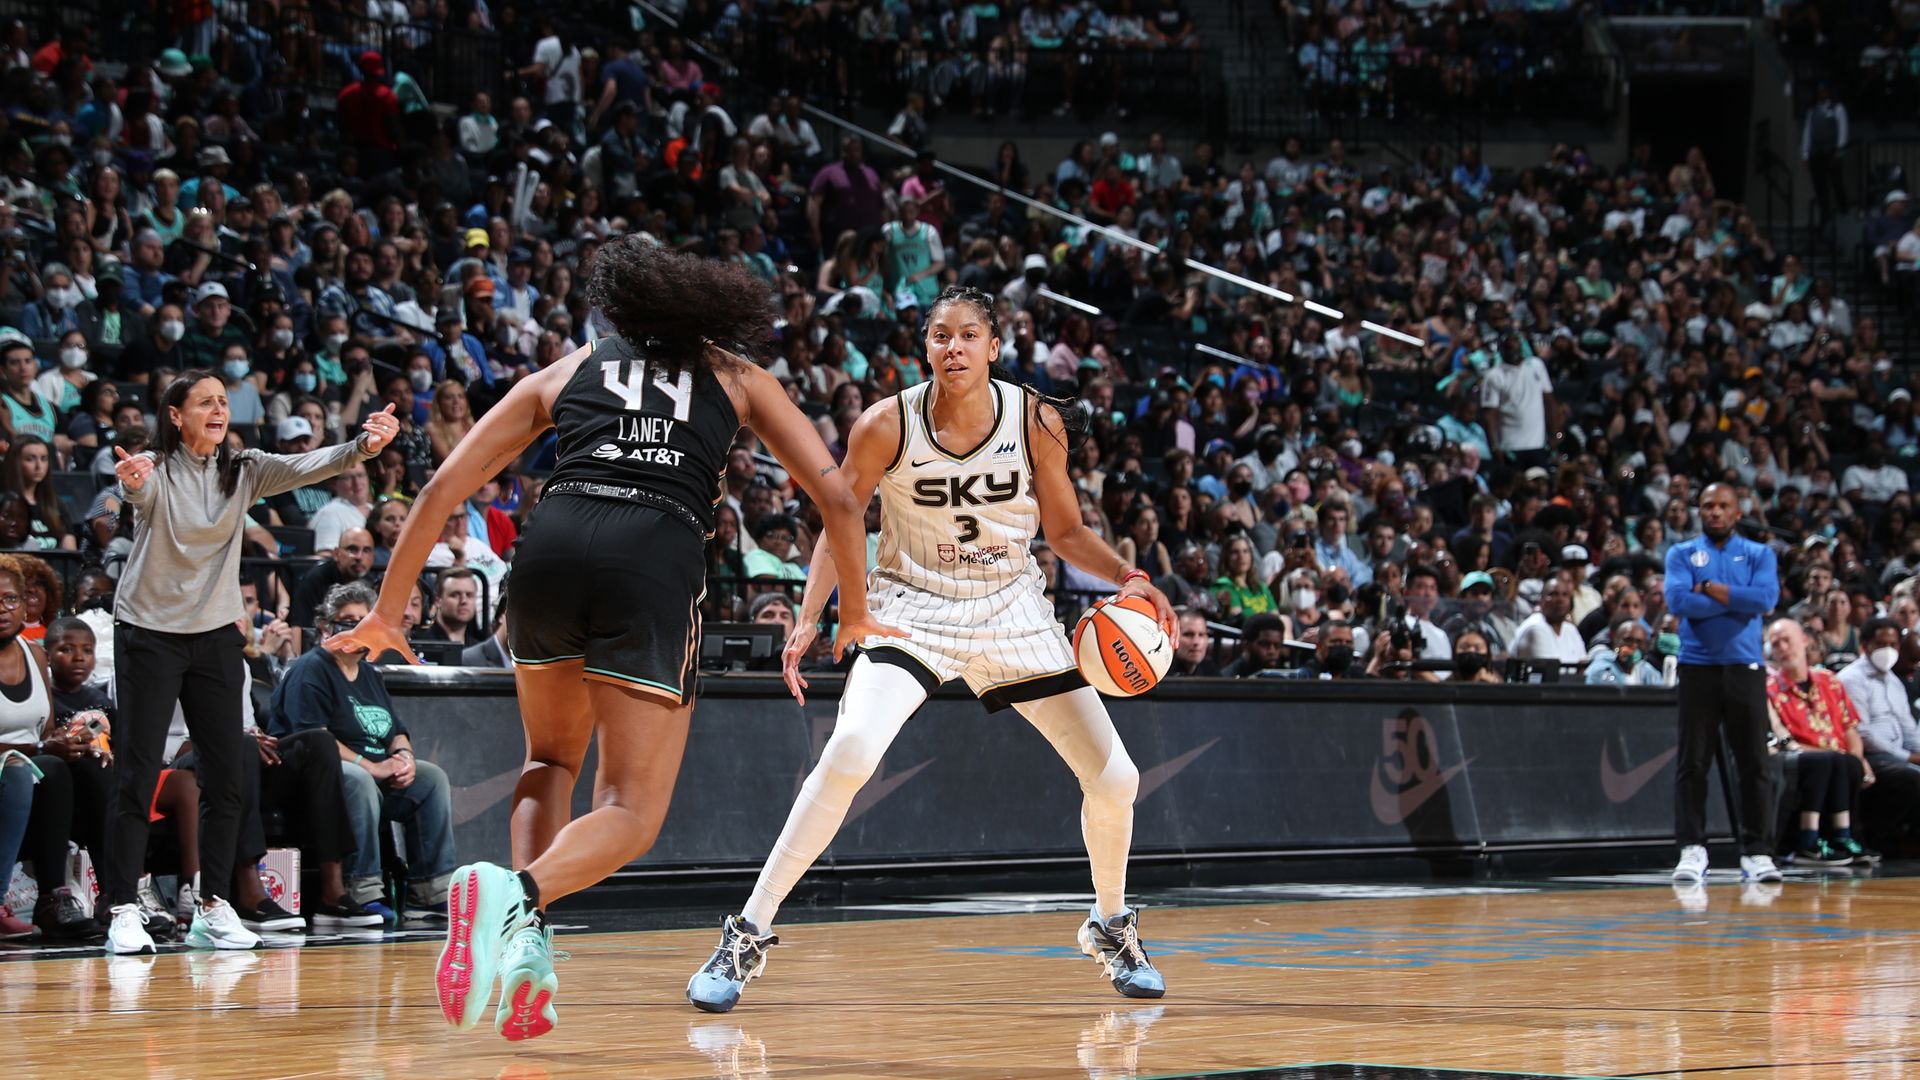 Candace Parker #3 of the Chicago Sky dribbles the ball during Round 1 Game 3 of the 2022 WNBA Playoffs